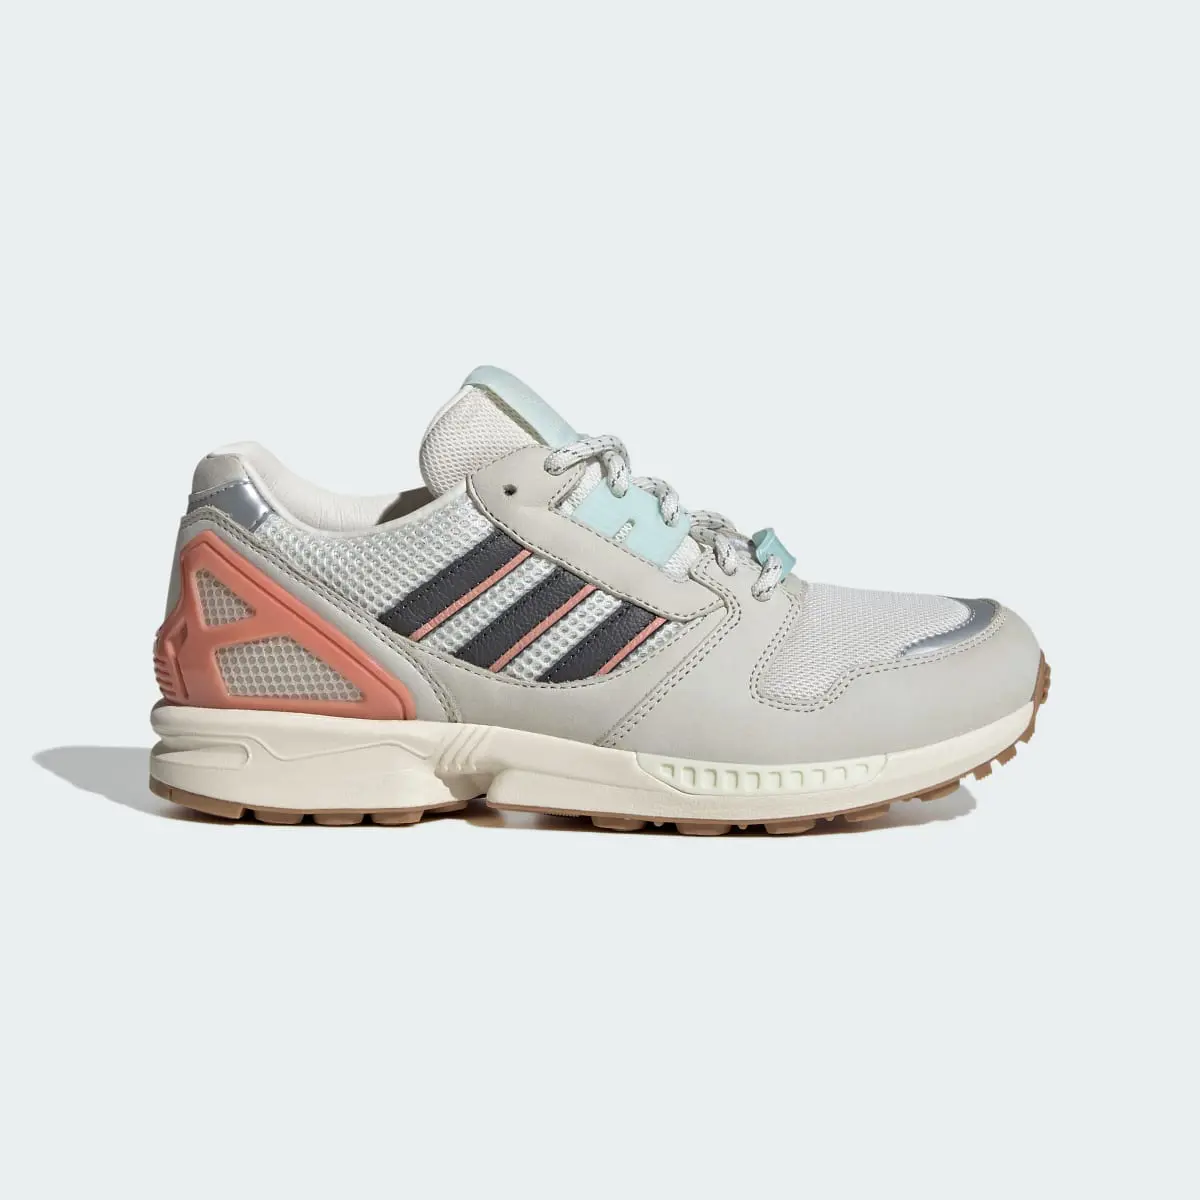 Adidas ZX 8000 Shoes. 2